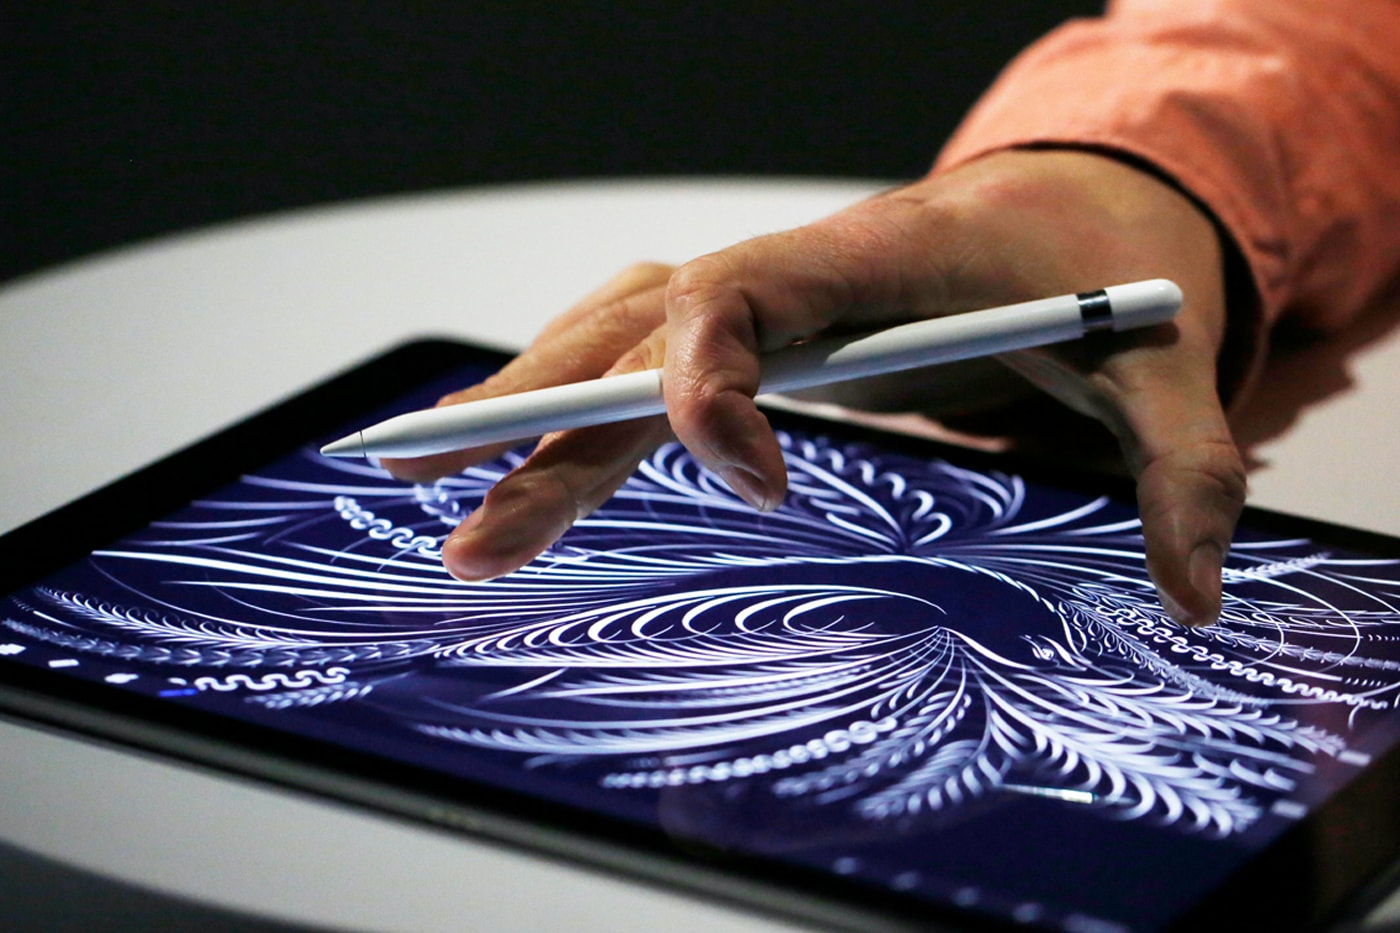 An iPad that folds into an iPhone? Apple's apparently working on